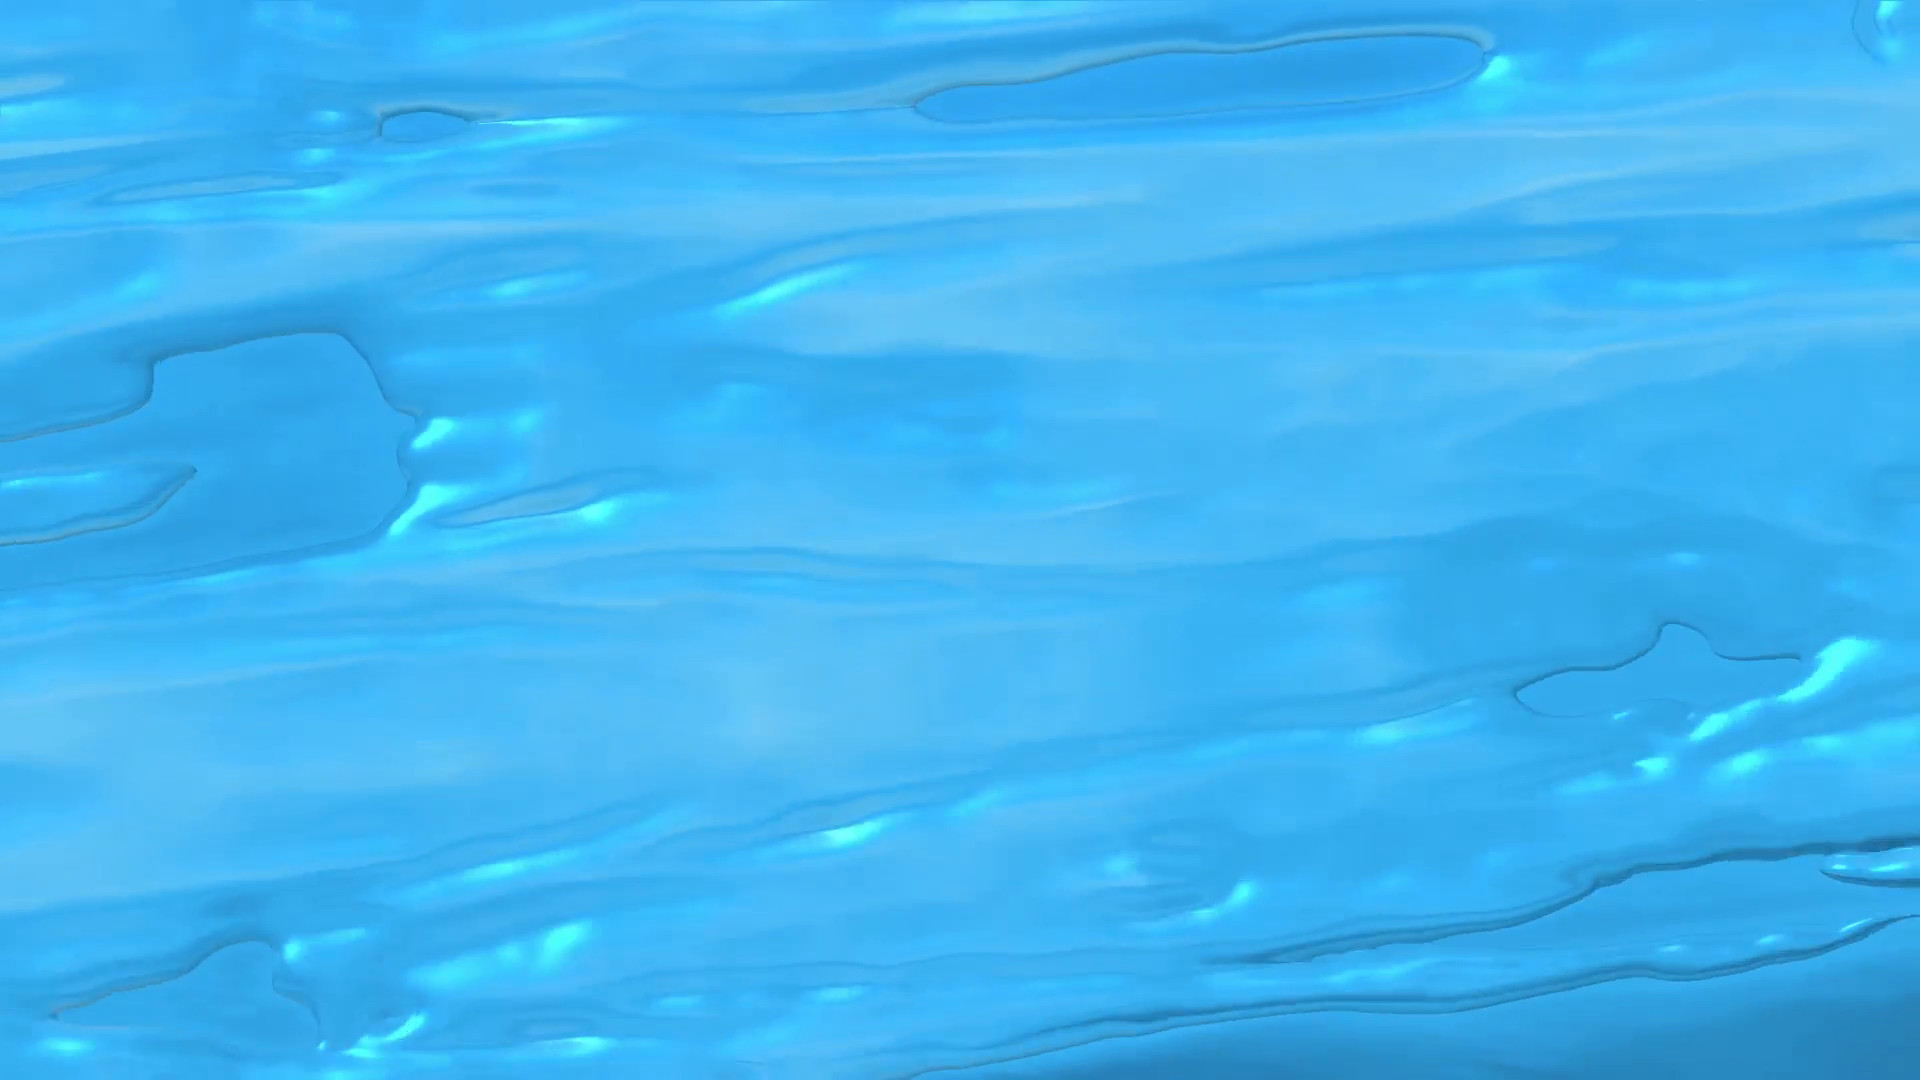 1920x1080  Blue water background animation based on real water footage  Motion Background - VideoBlocks